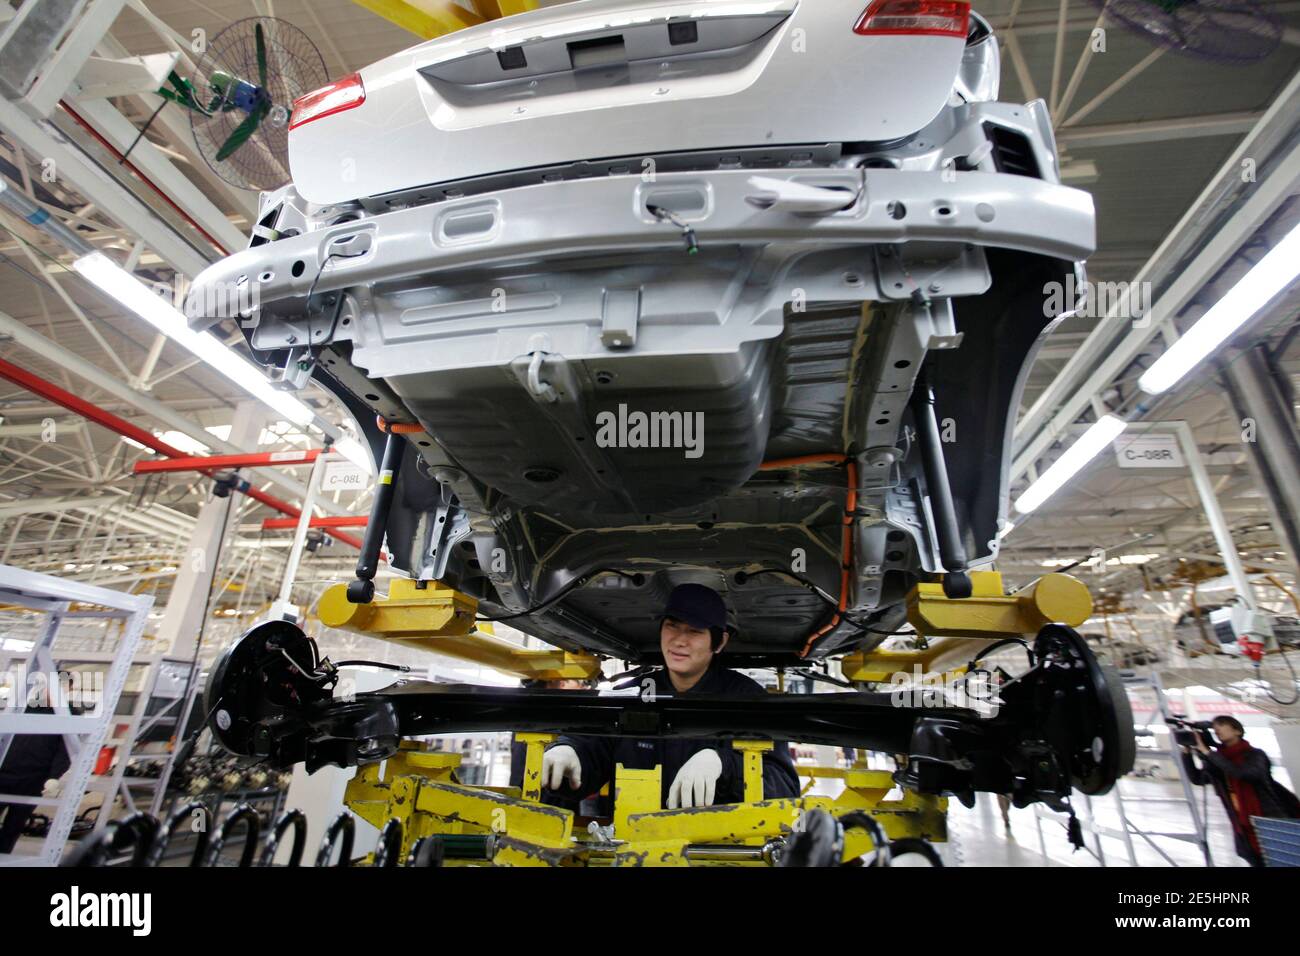 An employee works at the Beiqi E150EV car assembly line of Beijing Electric Vehicle Company, in Beijing November 7, 2012. China's central government will allocate funding to support technological innovation projects such as electric vehicles, plug-in hybrid vehicles and fuel cell vehicles in the nation's new energy auto industry, according to an announcement from the Ministry of Finance. A statement on the ministry's website also said that funds will be used to support the development of new vehicle batteries. REUTERS/Jason Lee (CHINA - Tags: TRANSPORT BUSINESS ENERGY SCIENCE TECHNOLOGY) Stock Photo